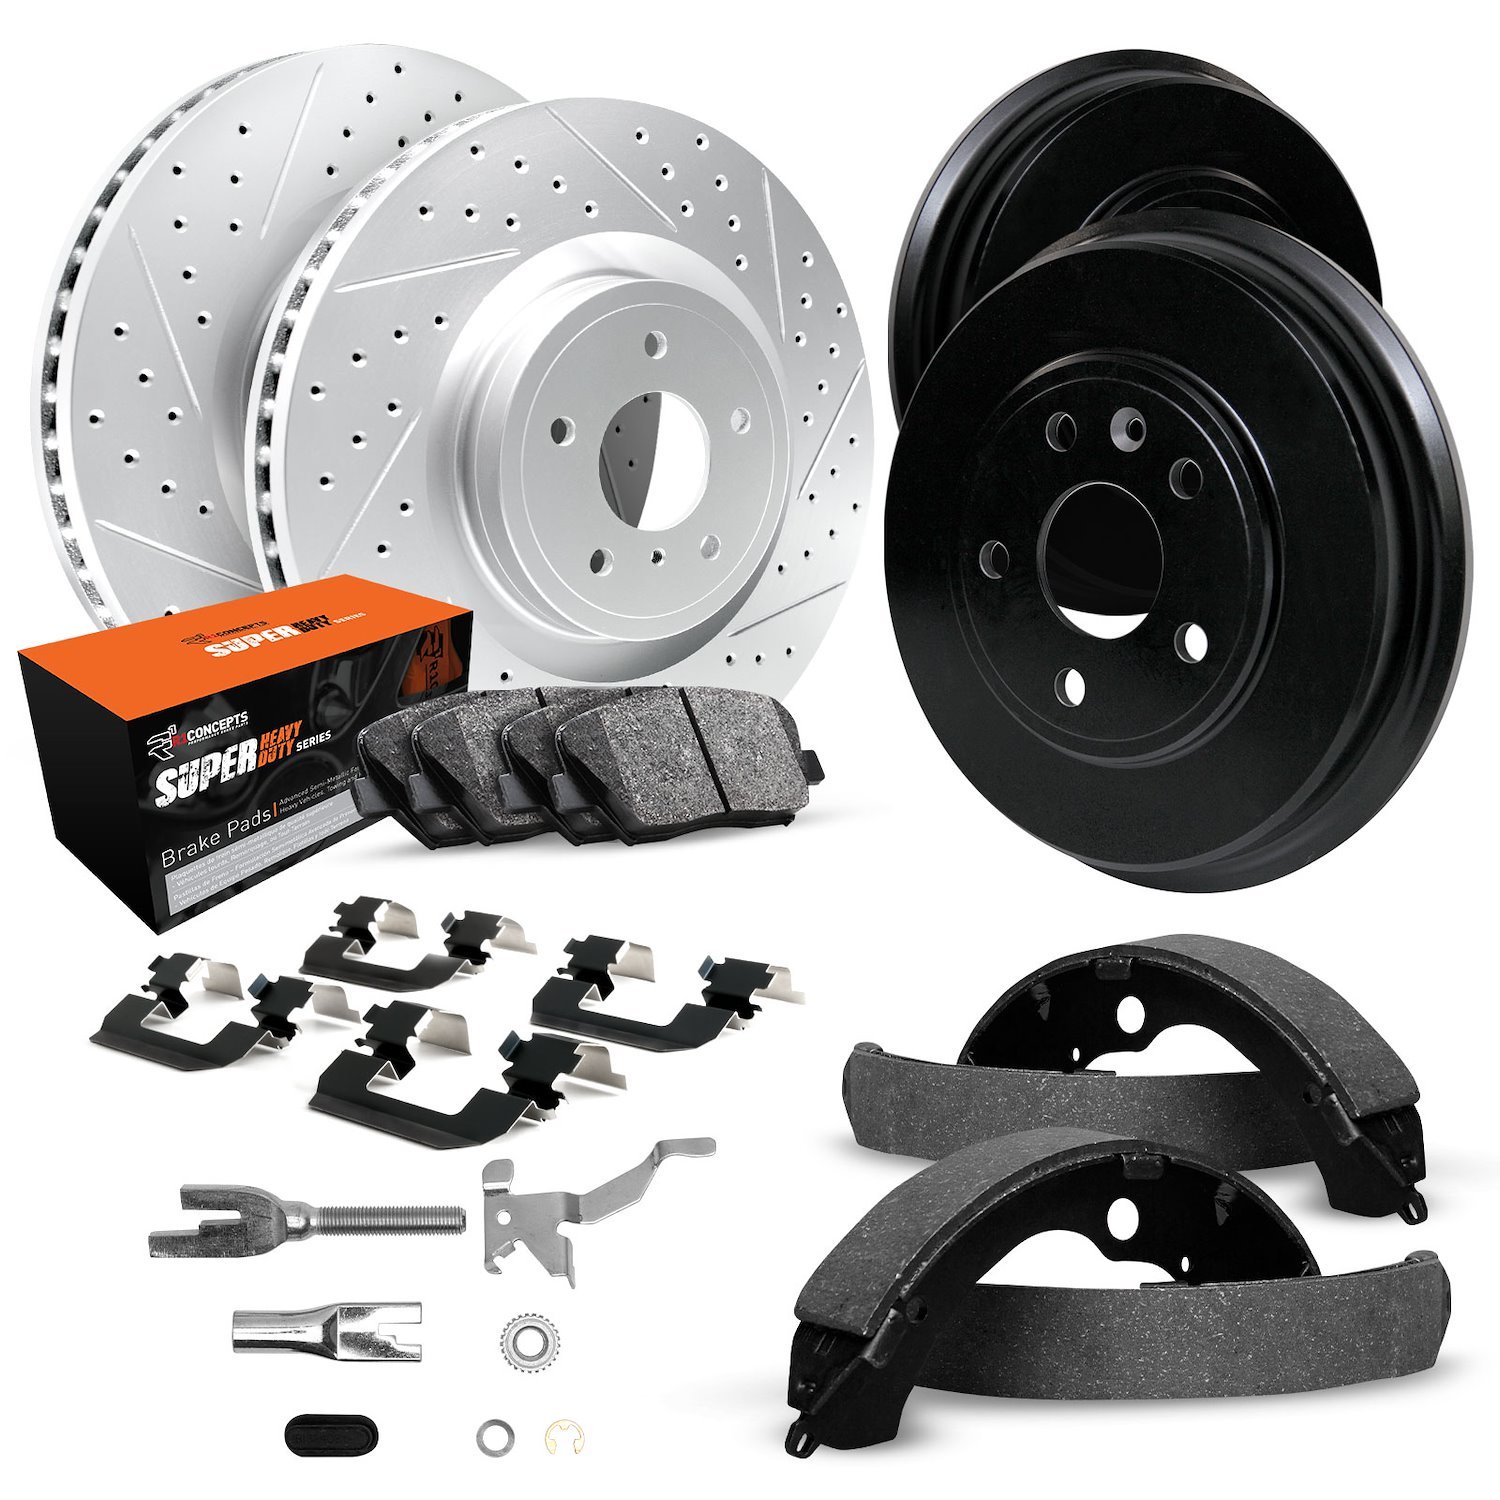 GEO-Carbon Drilled/Slotted Rotors/Drums w/Super-Duty Pads/Shoes/Hardware/Adjusters, 1974-1974 GM, Position: Front/Rear